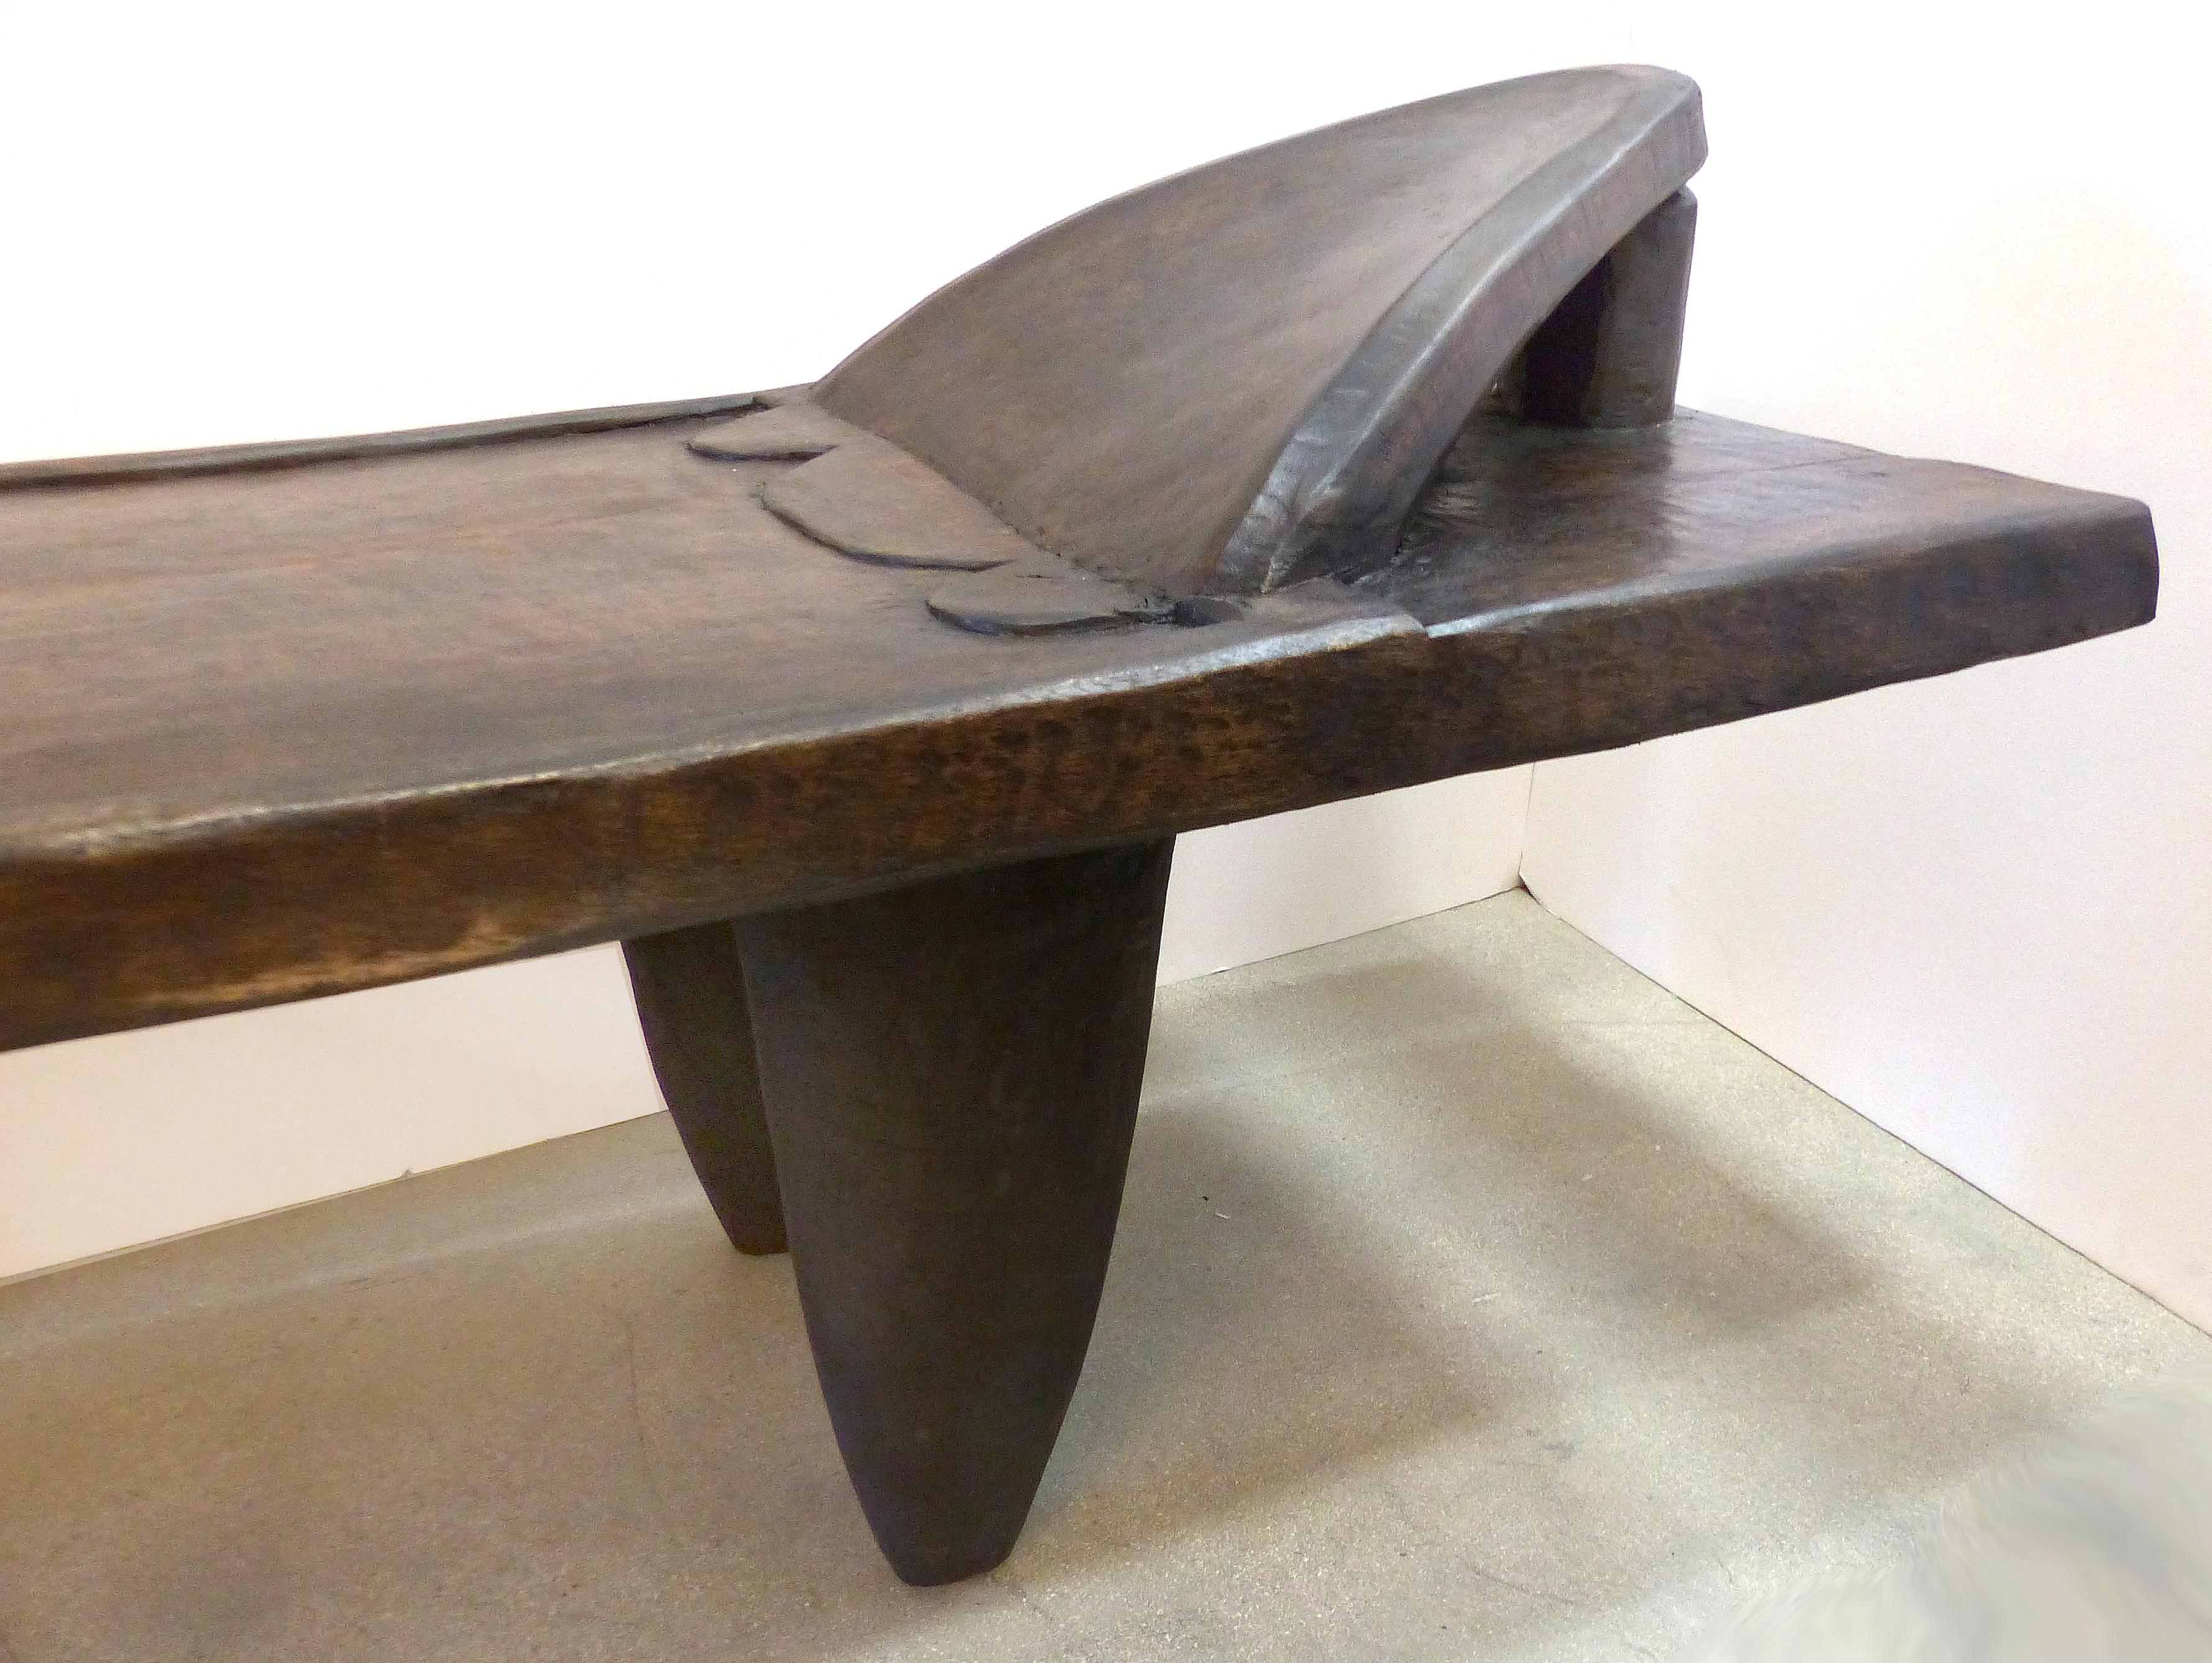 African Senufo Bed/Bench from the Coite d'Ivoire

Offered for sale is a large African Senufo Bed from the Cote d'Ivoire which has the perfect dimensions to use as a bench. Used in rites of passage. The large, wonderful example is carved from a solid